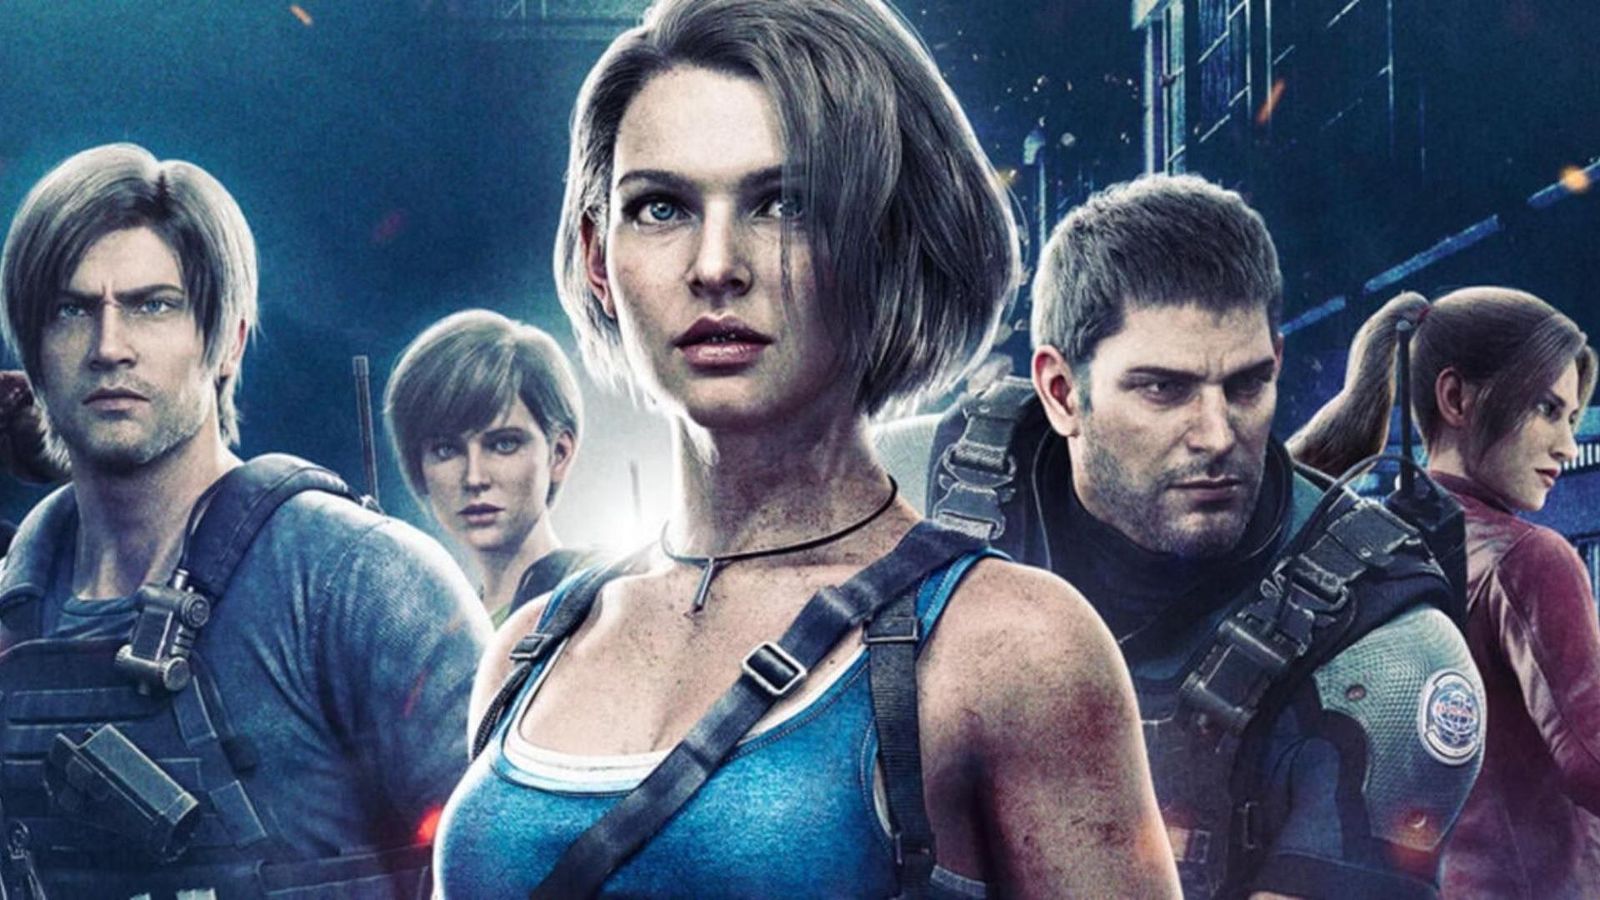 jill valentine will remain hot forever as capcom bans aging